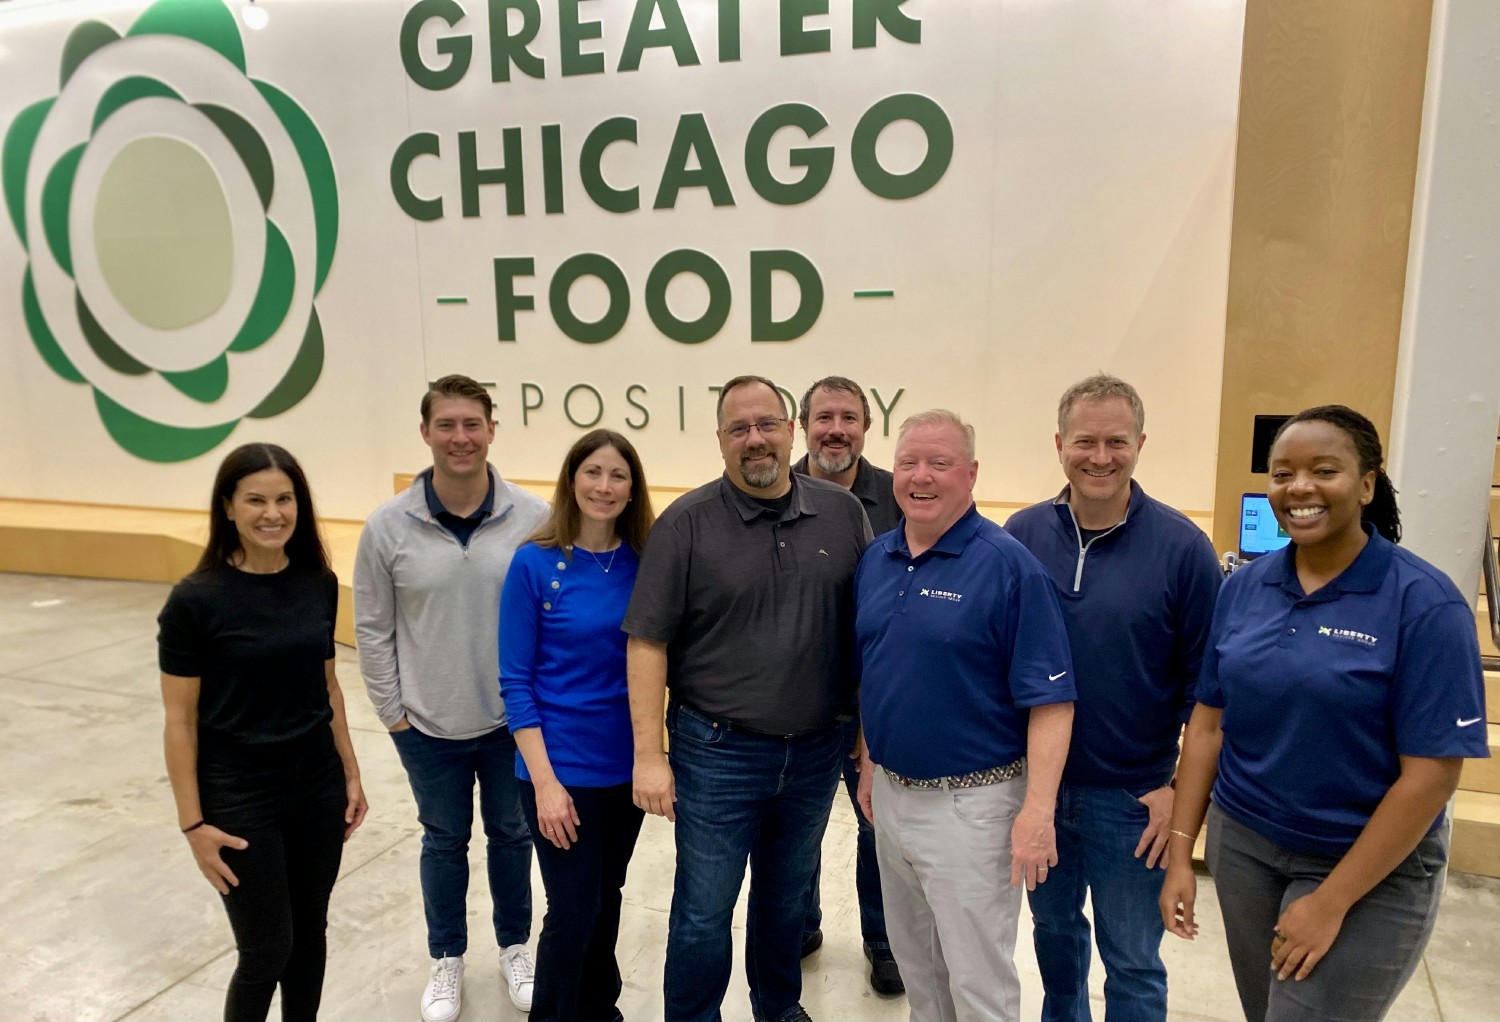 Liberty dedicated a workday giving back to the Chicago Food Depository.